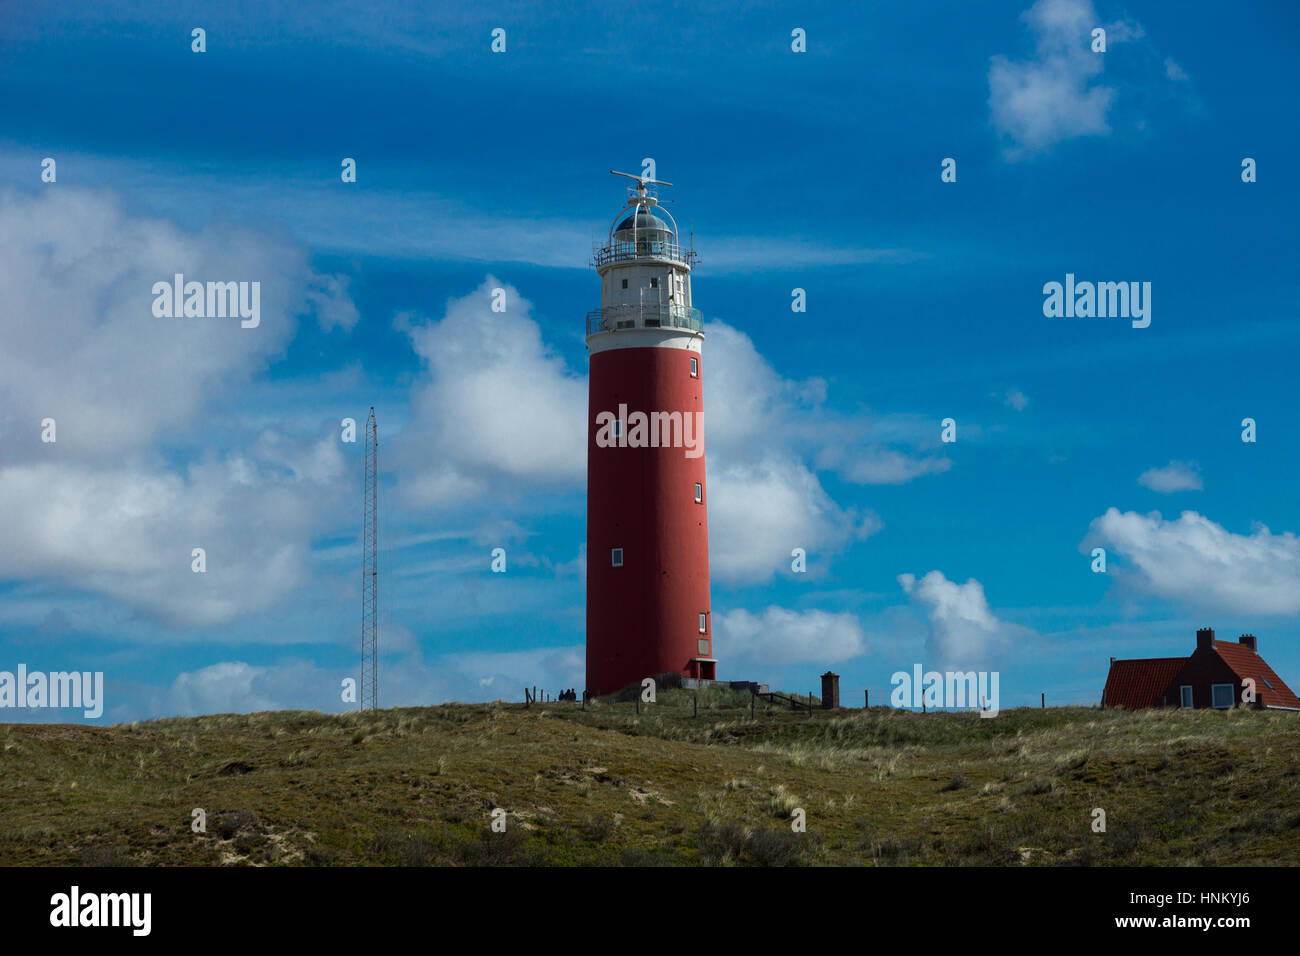 The lighthouse of the island of Texel in The Netherlands on a sunny day Stock Photo